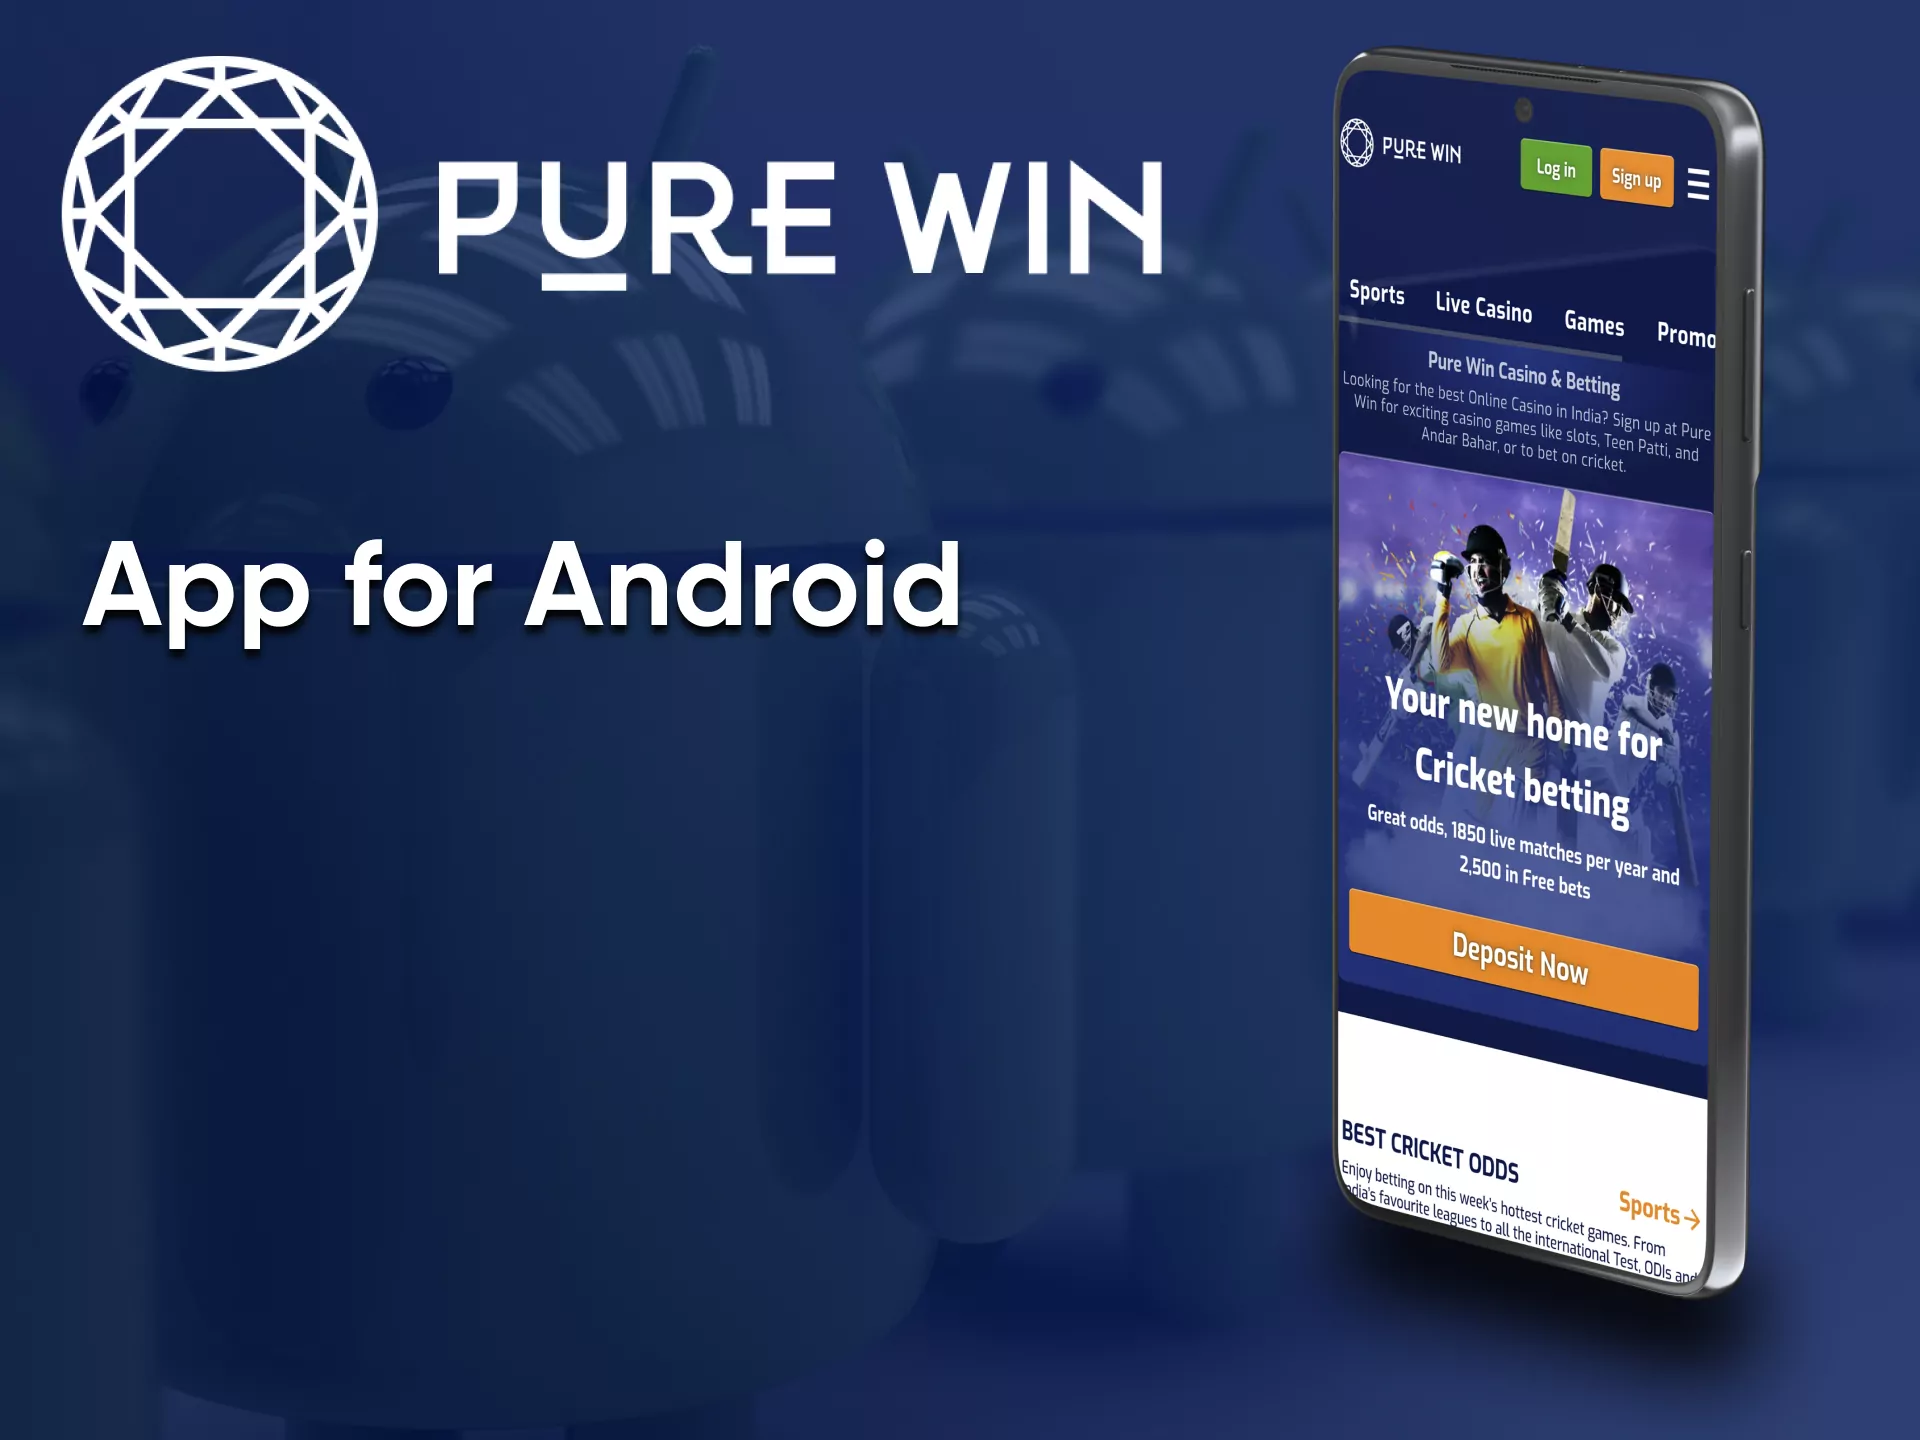 Find an application for your device on the site from Pure Win.